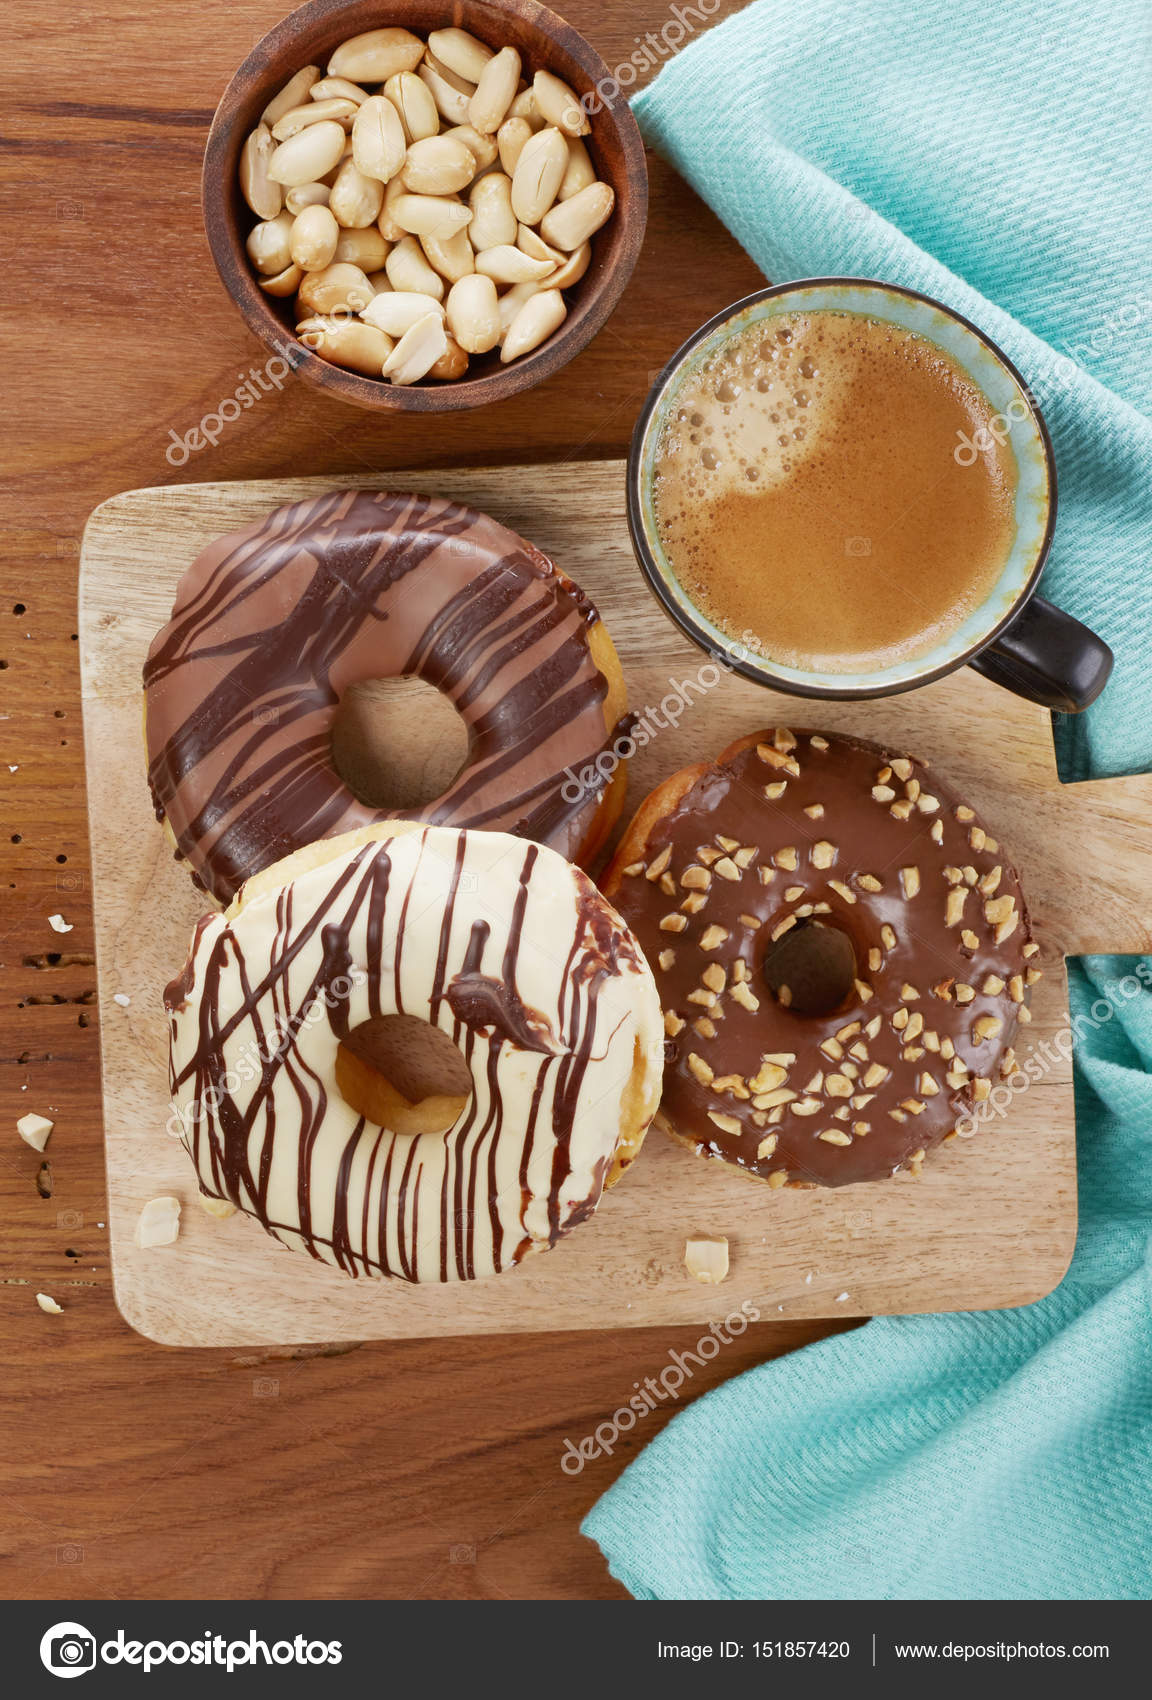 TOMBE LA NEIGE! - Page 38 Depositphotos_151857420-stock-photo-donuts-and-coffee